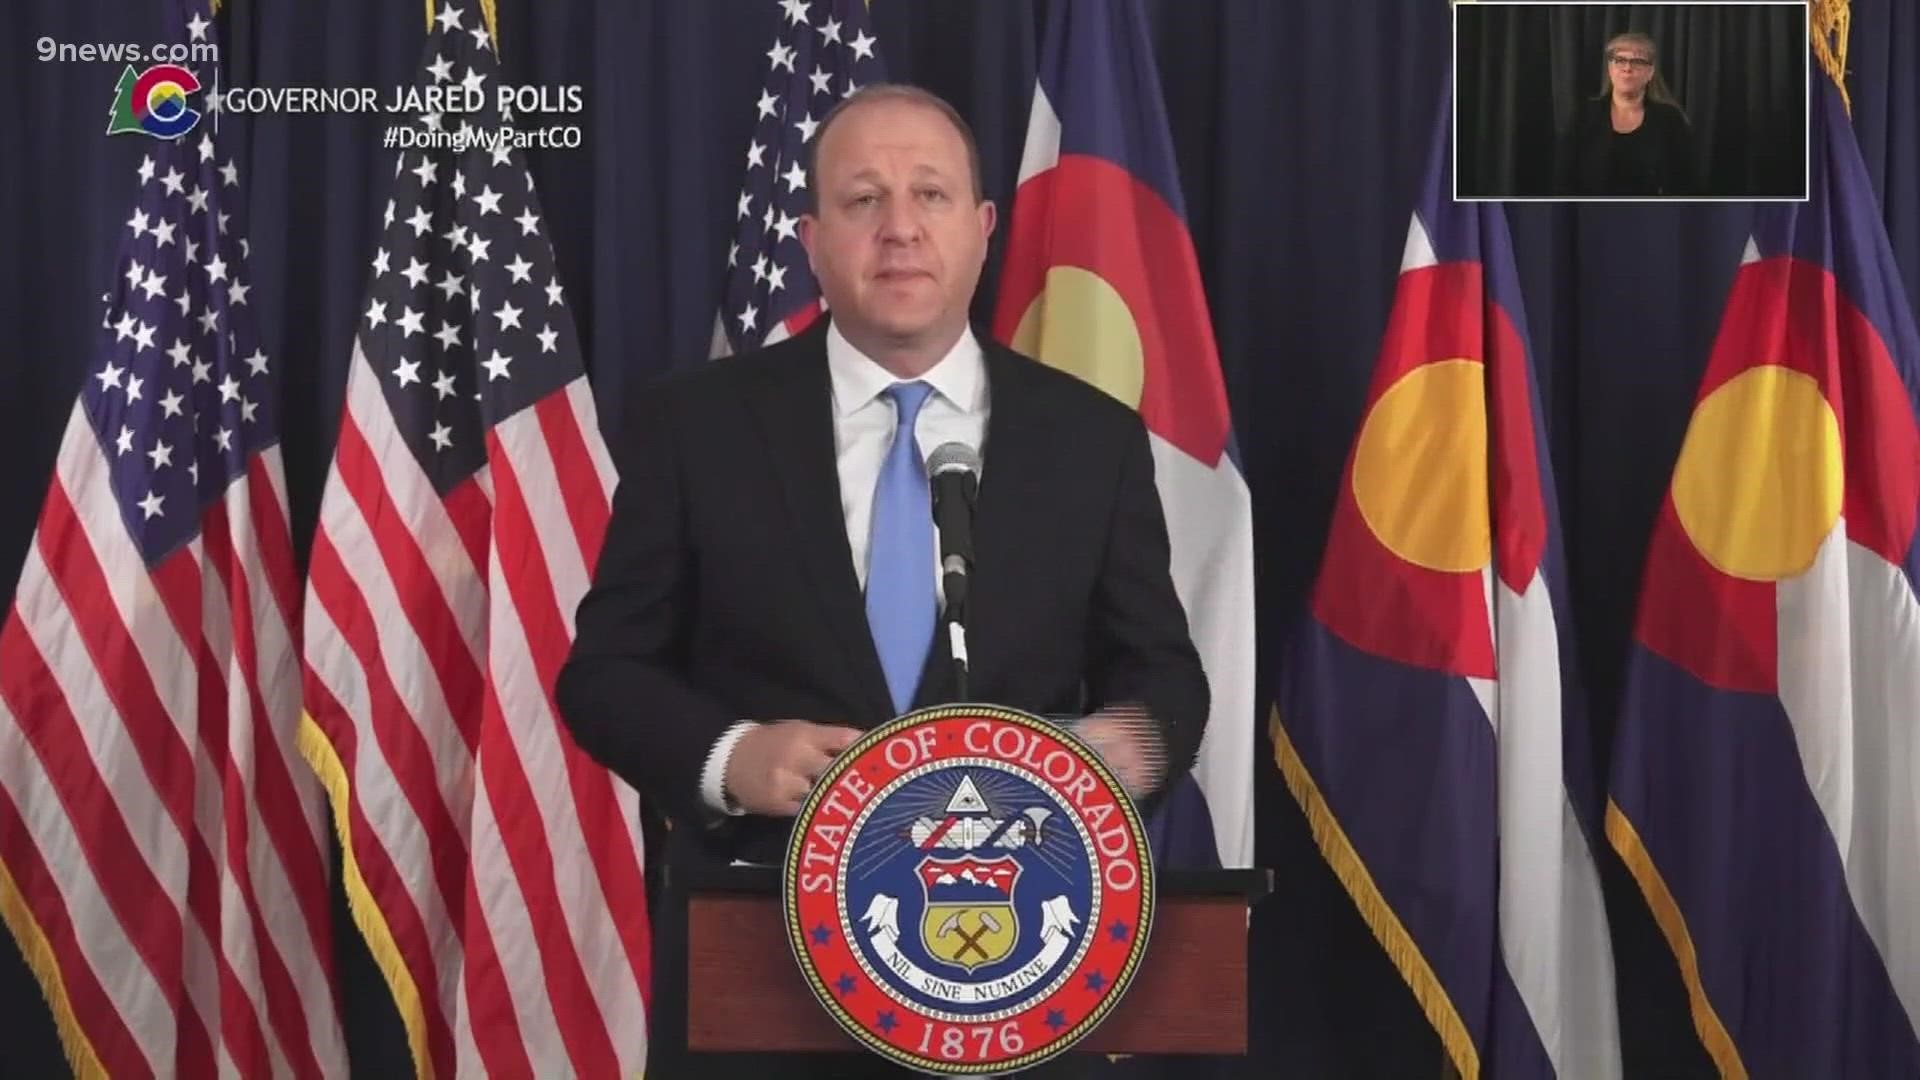 Gov. Jared Polis provided an update on the state's response to the pandemic as it prepares to receive 45,500 Johnson & Johnson vaccine doses.